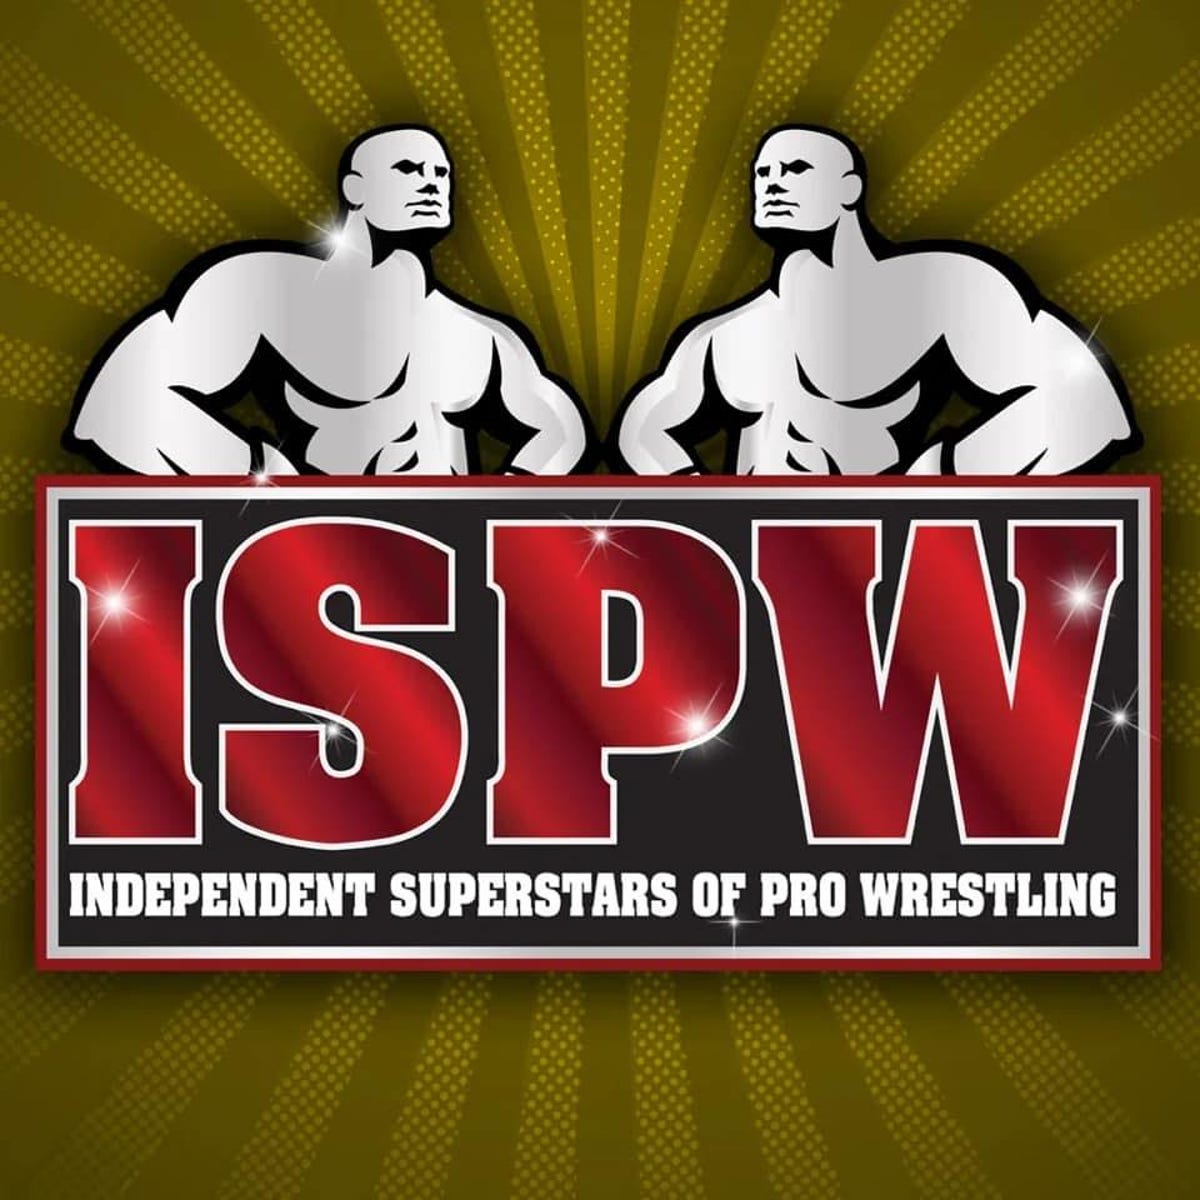 ISPW coming to Garfield Middle School for Tuesday night fundraiser